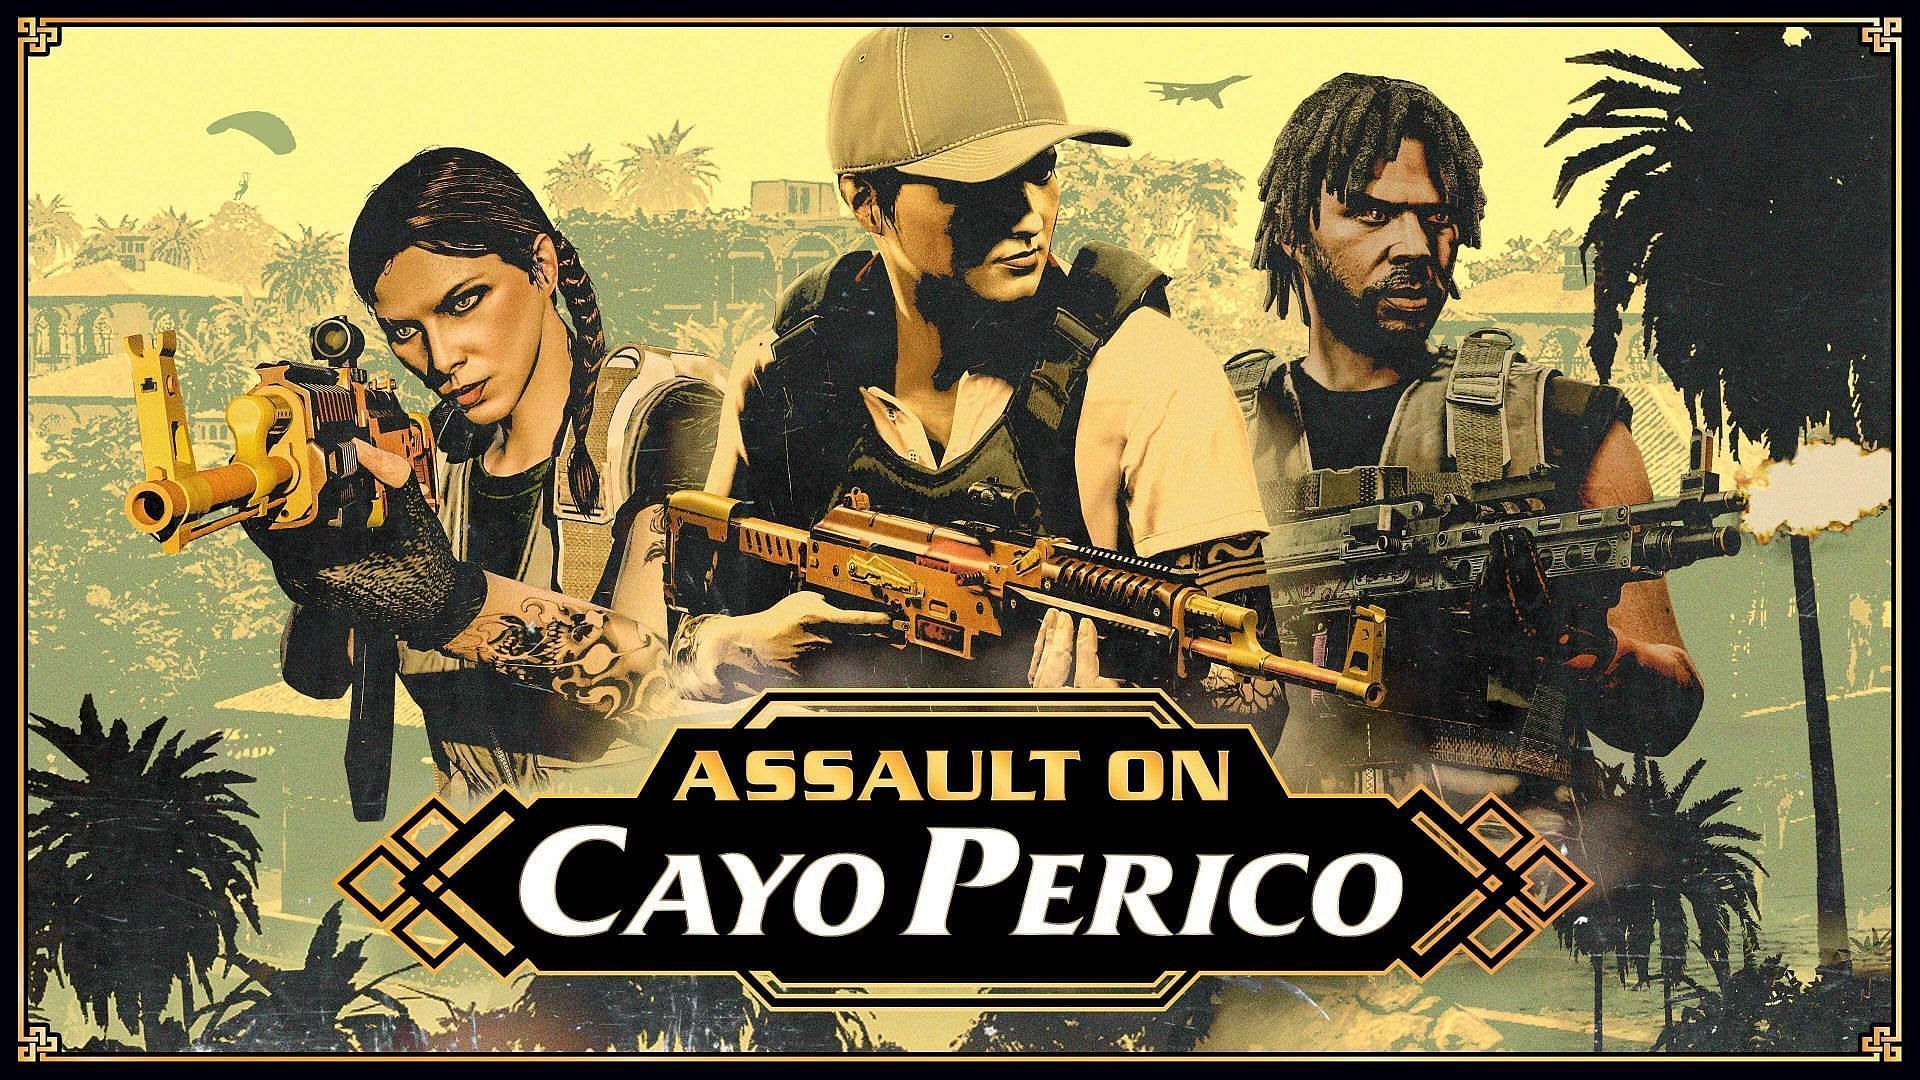 Assault on Cayo Perico payouts are reportedly being nerfed (Image via Rockstar Games)